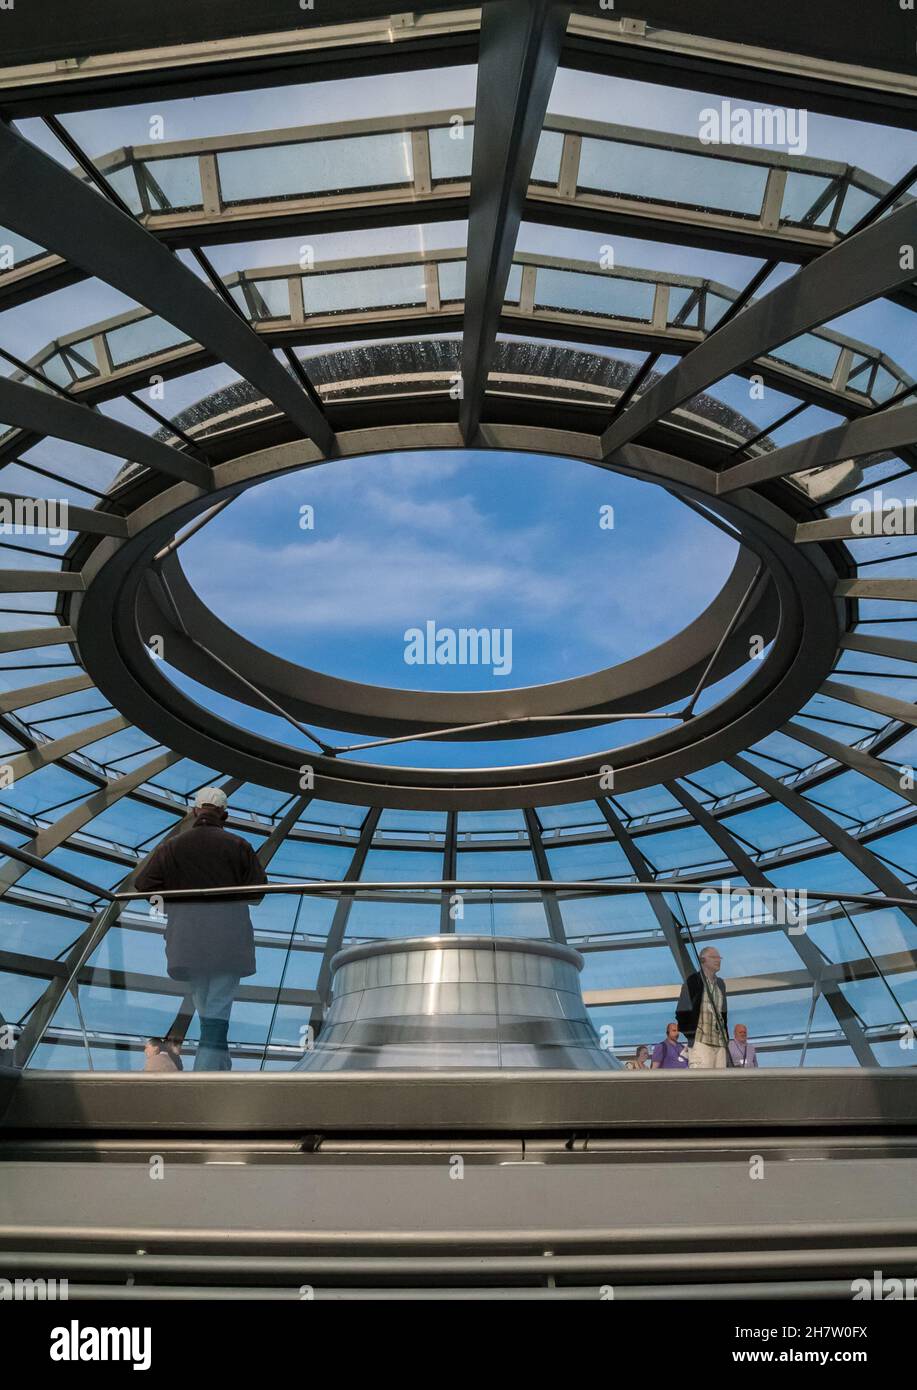 Great view of the roof of the glass dome atop the Reichstag building in Berlin with the air vent that helps to ventilate the entire building naturally... Stock Photo